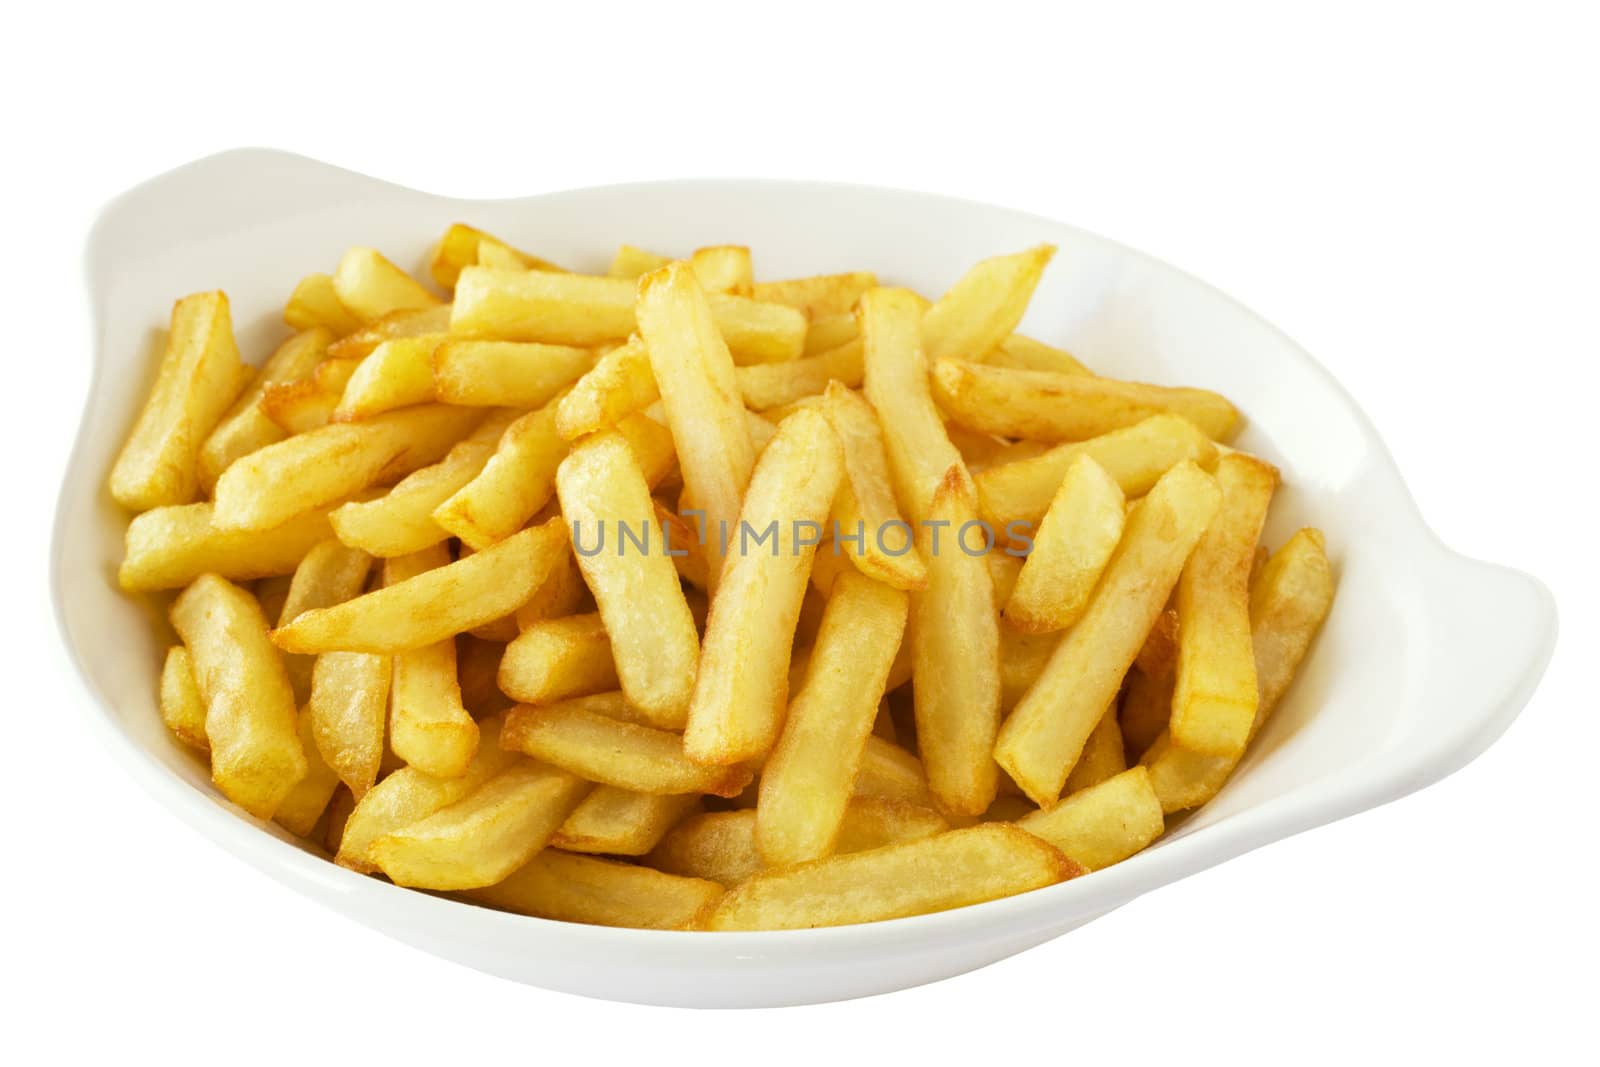 A bowl of french fries or chips, isolated on white with clipping path provided.